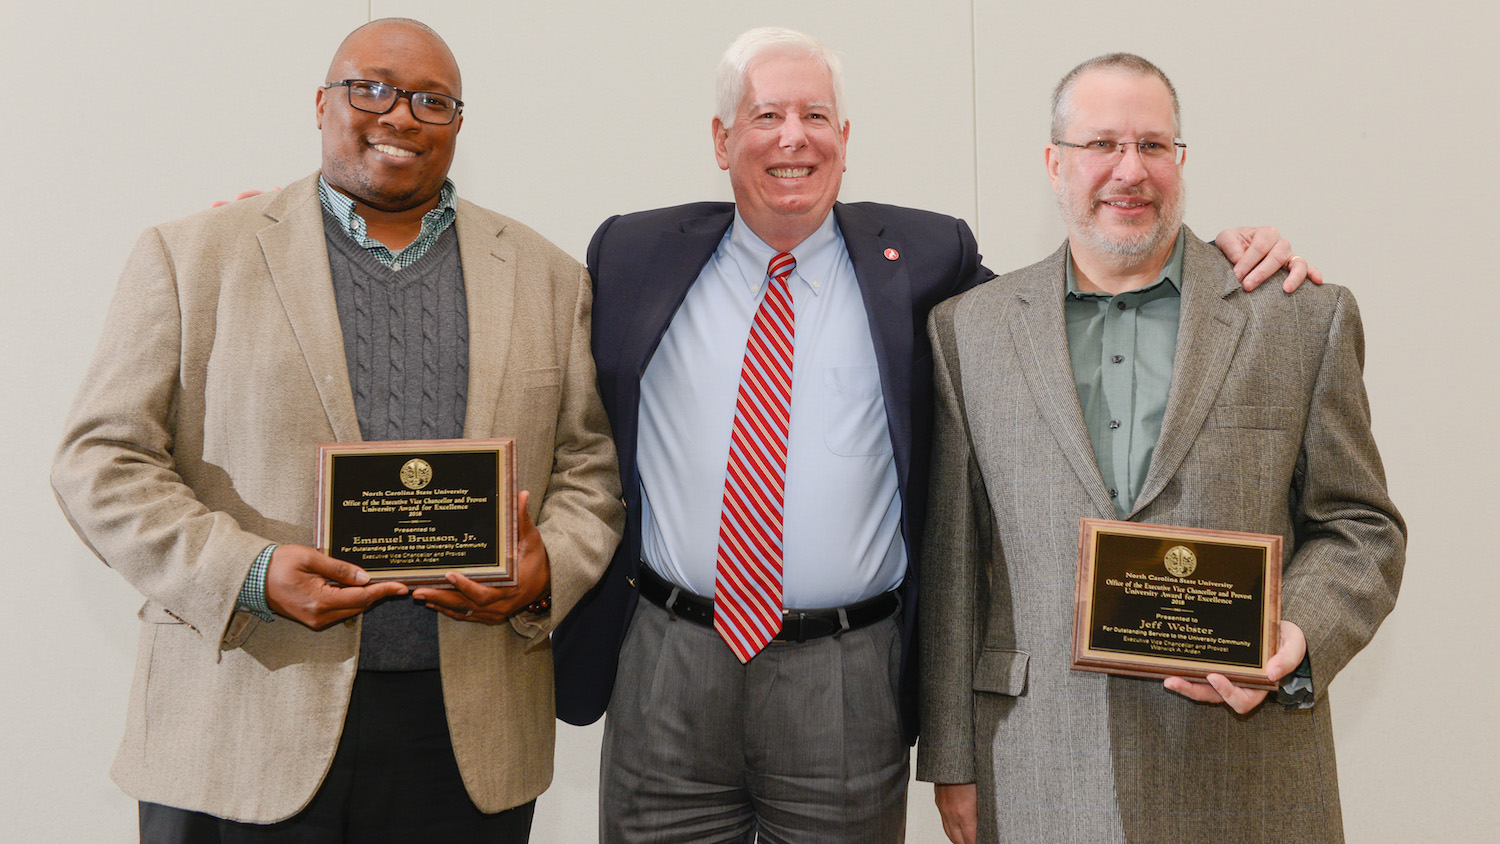 Awards for Excellence recipients Emanuel Brunson (left) and Jeff Webster (right) pictured with Senior Vice Provost Tom Miller (center) at the reception ceremony March 21, 2018 in Talley Student Union. Photo by Marc Hall.